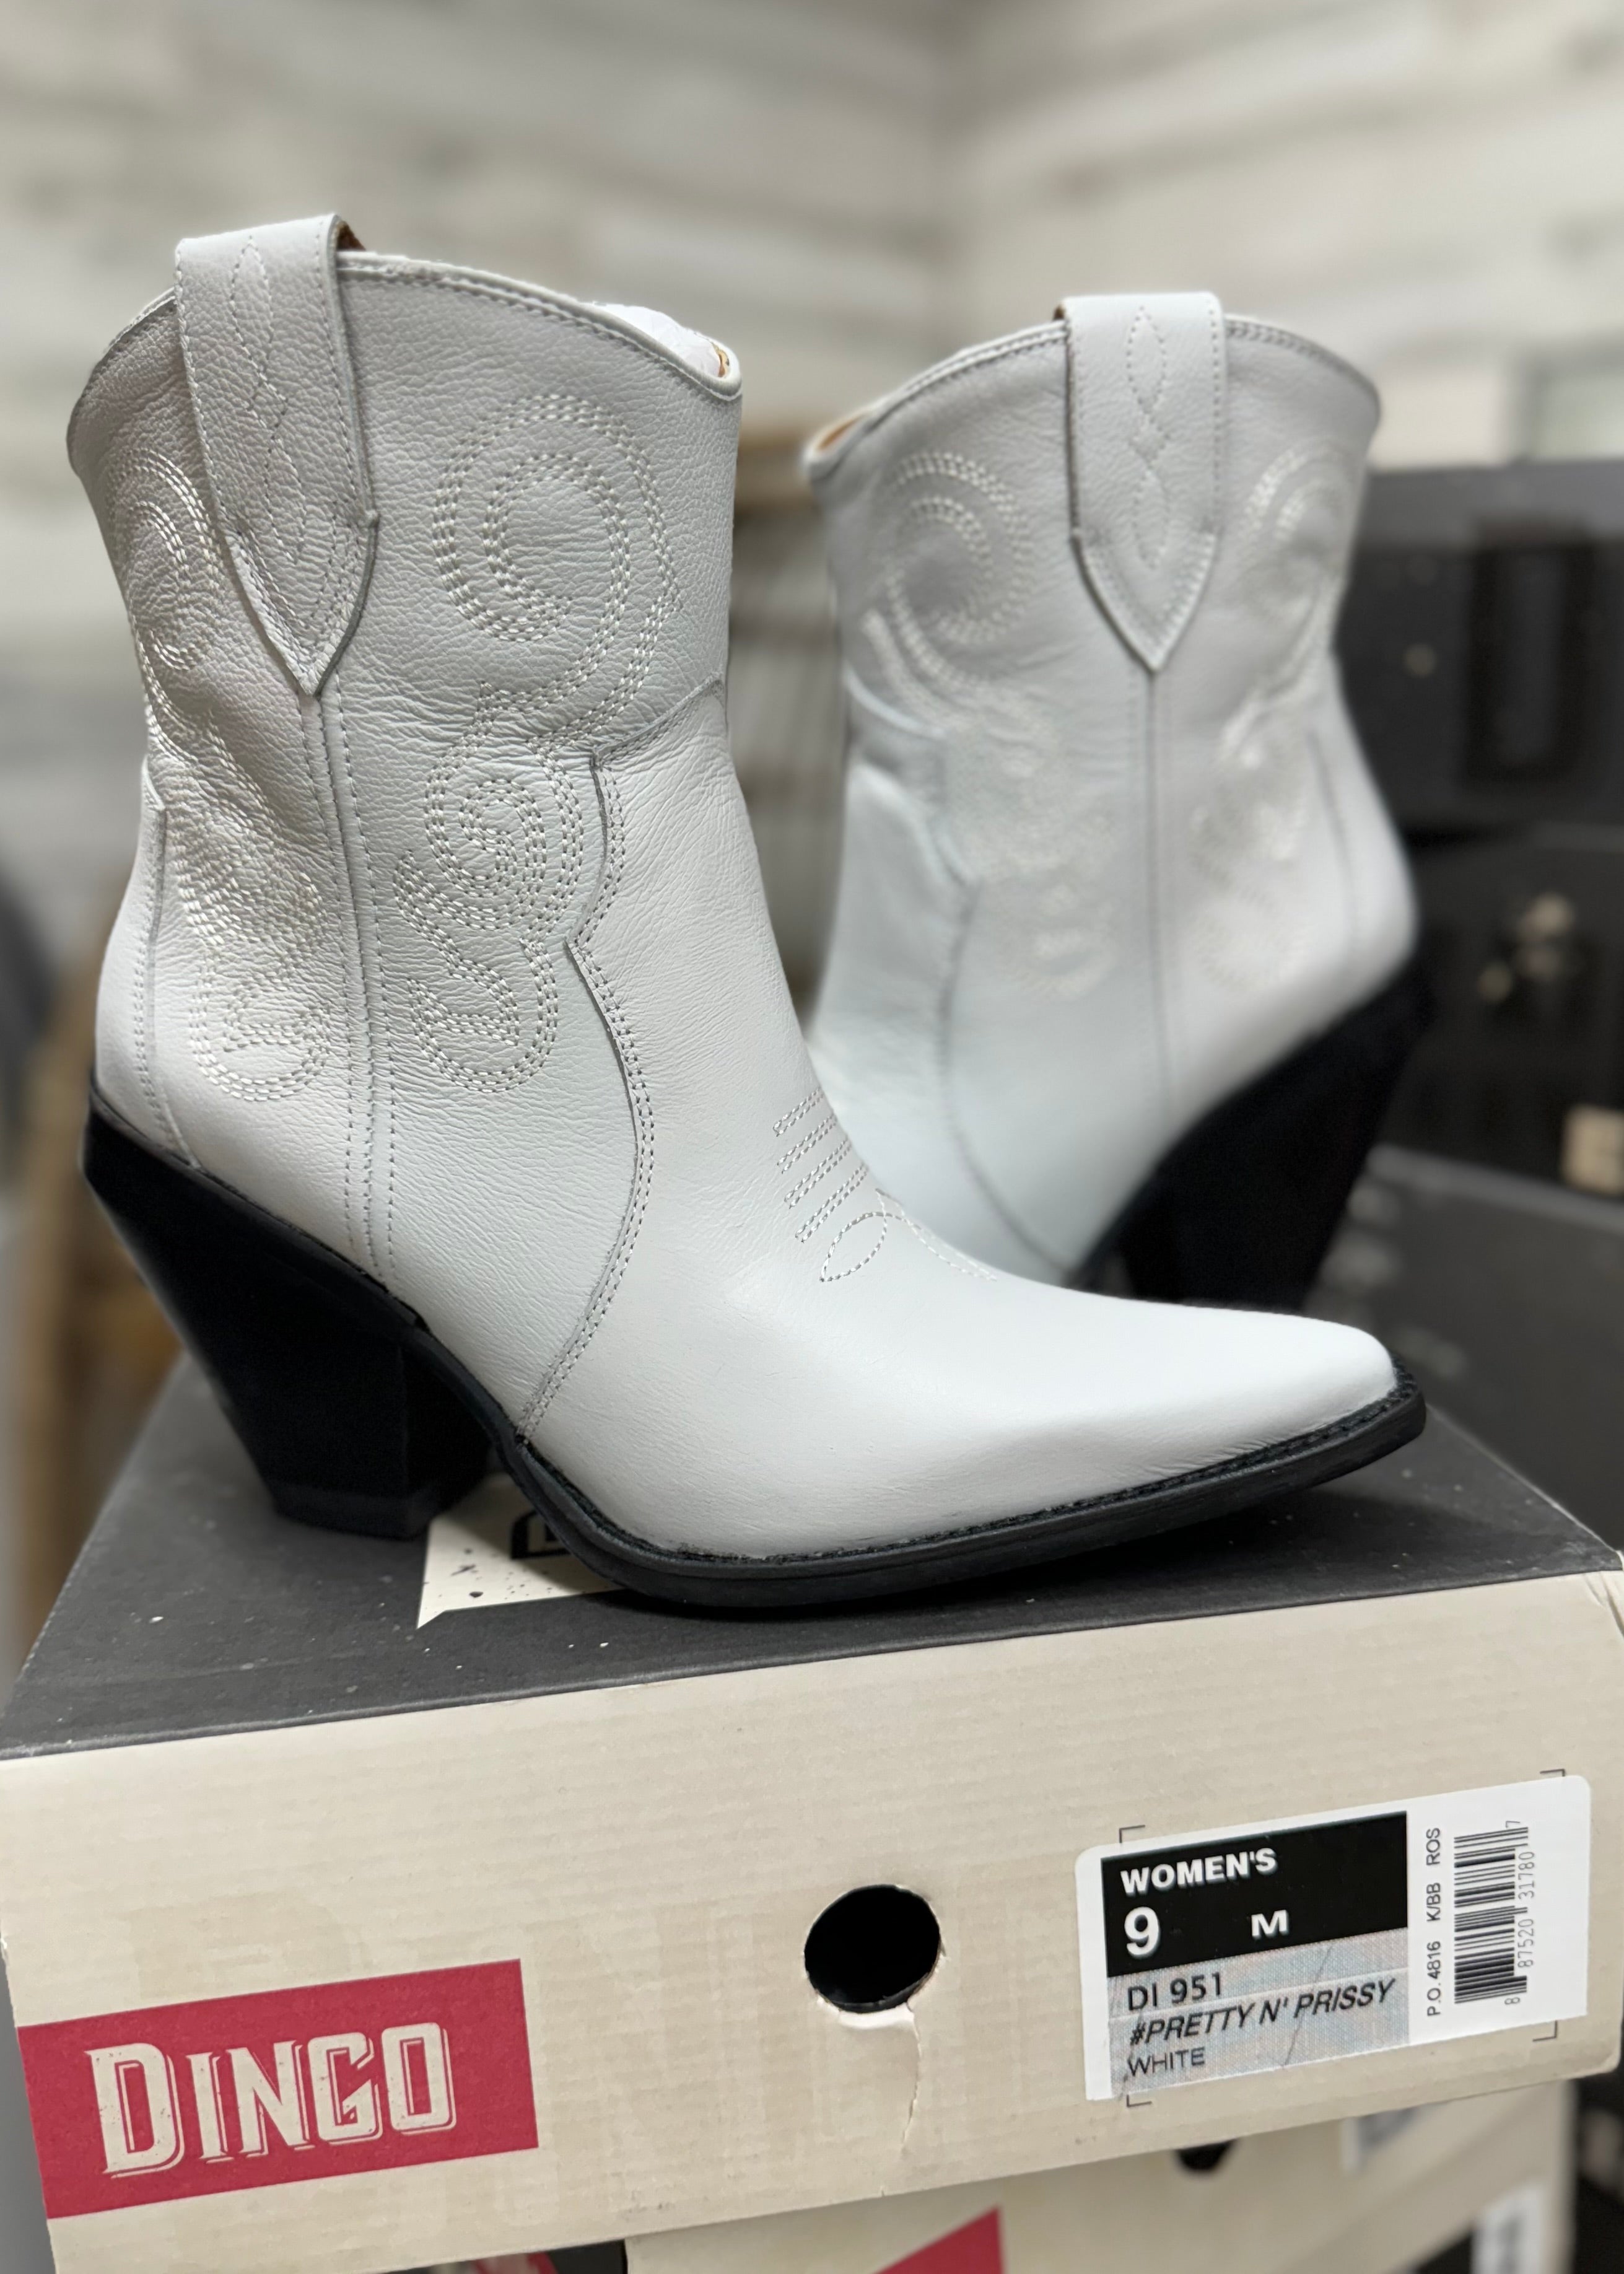 Model Shoes Size 9 | Dingo | Pretty N Prissy Leather Bootie in White  *DISCONTINUED* - Giddy Up Glamour Boutique